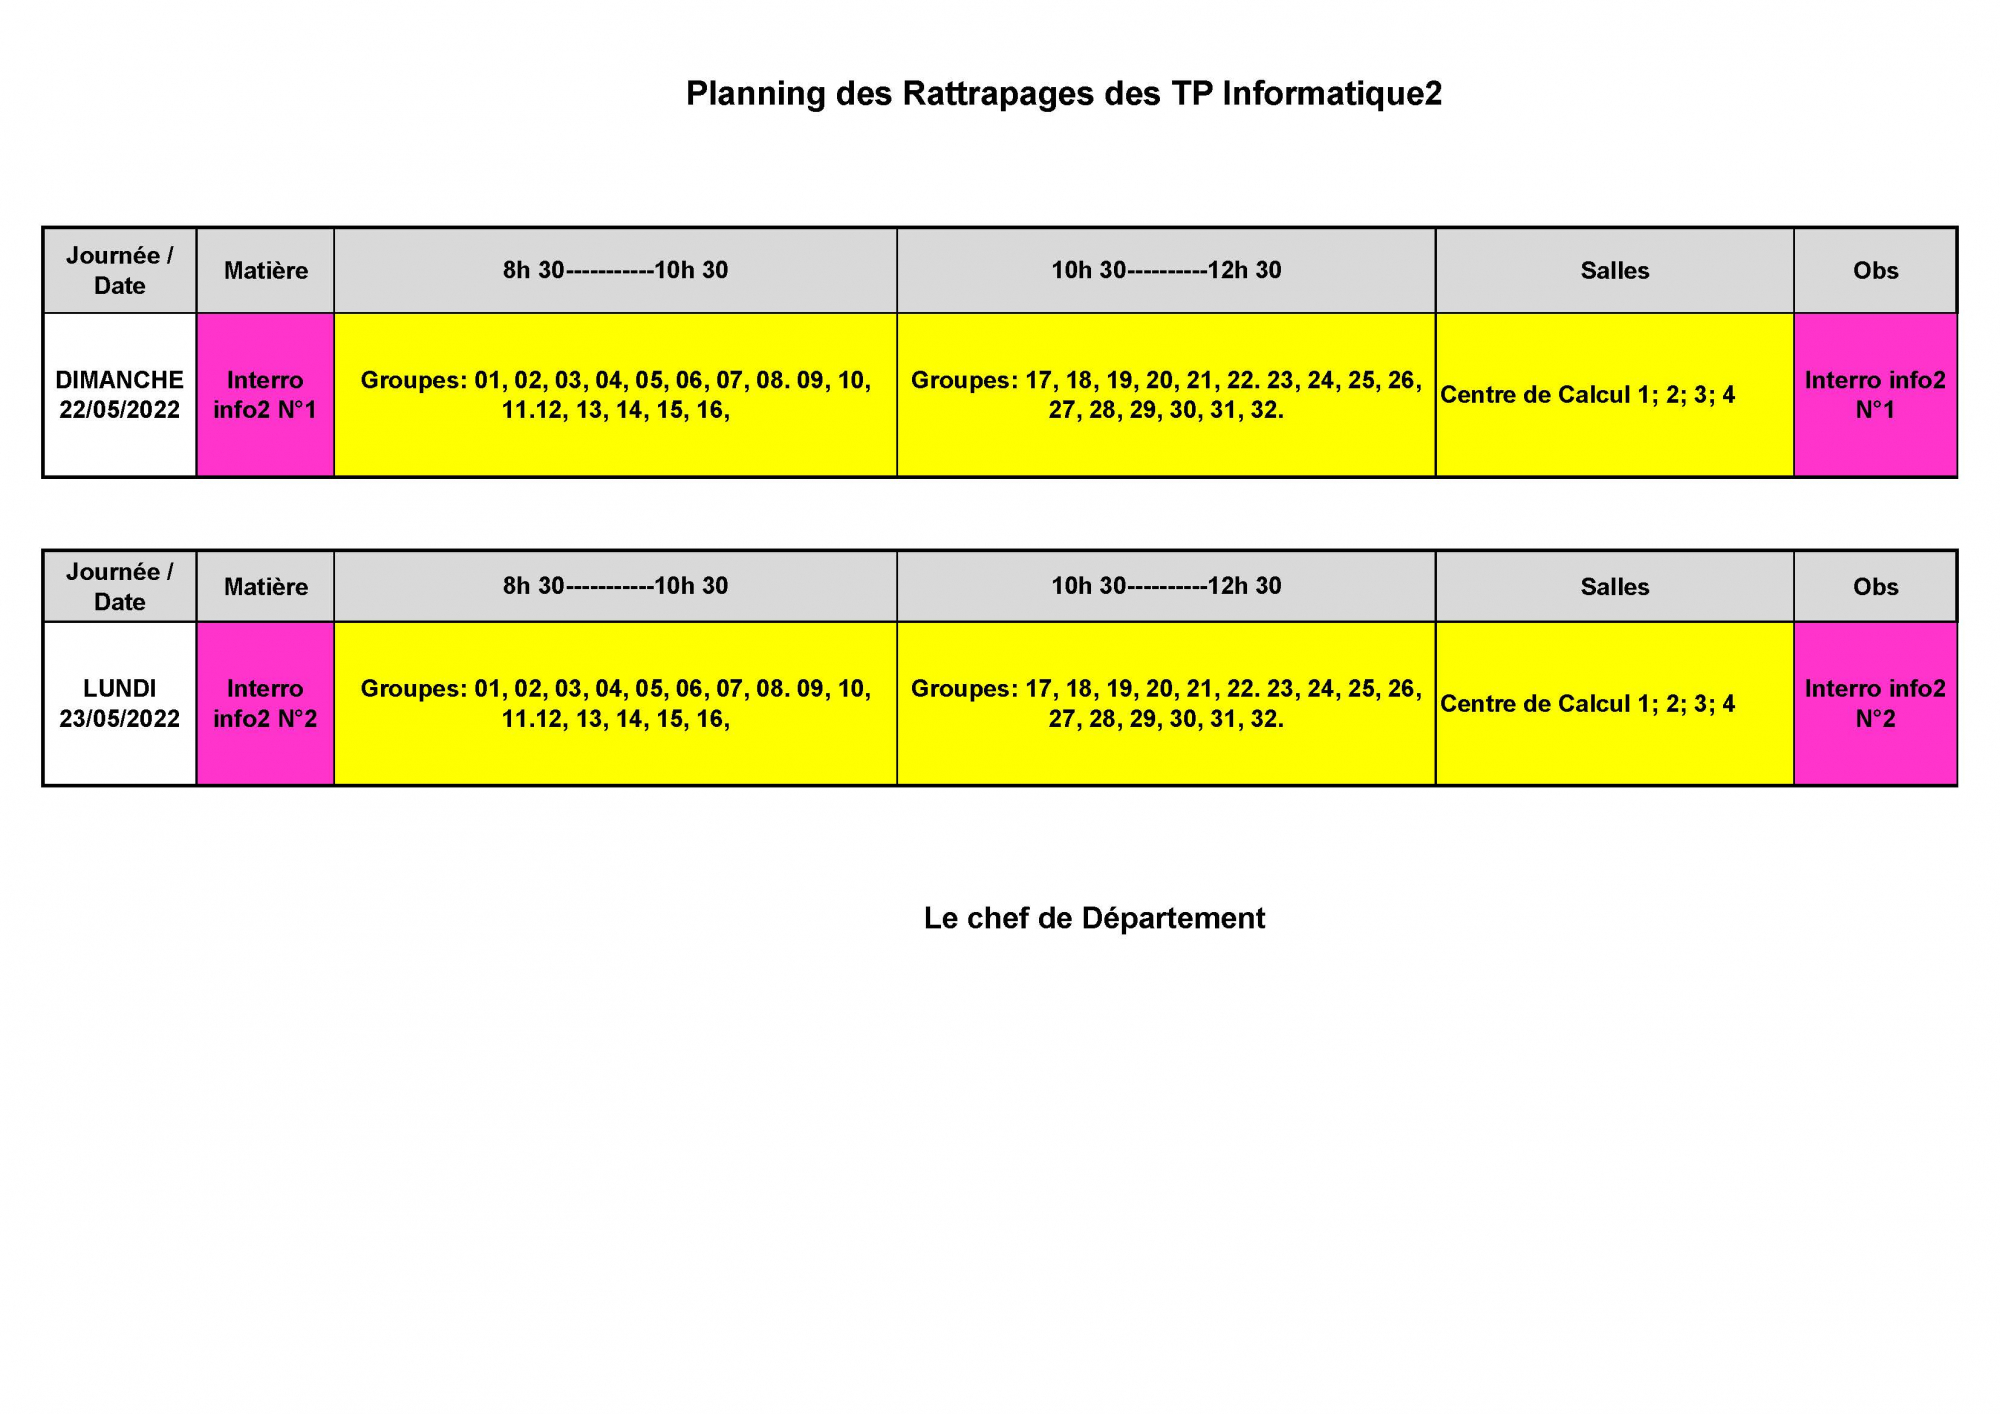 planning_rattrapage_tp_info_2_s2_21-22